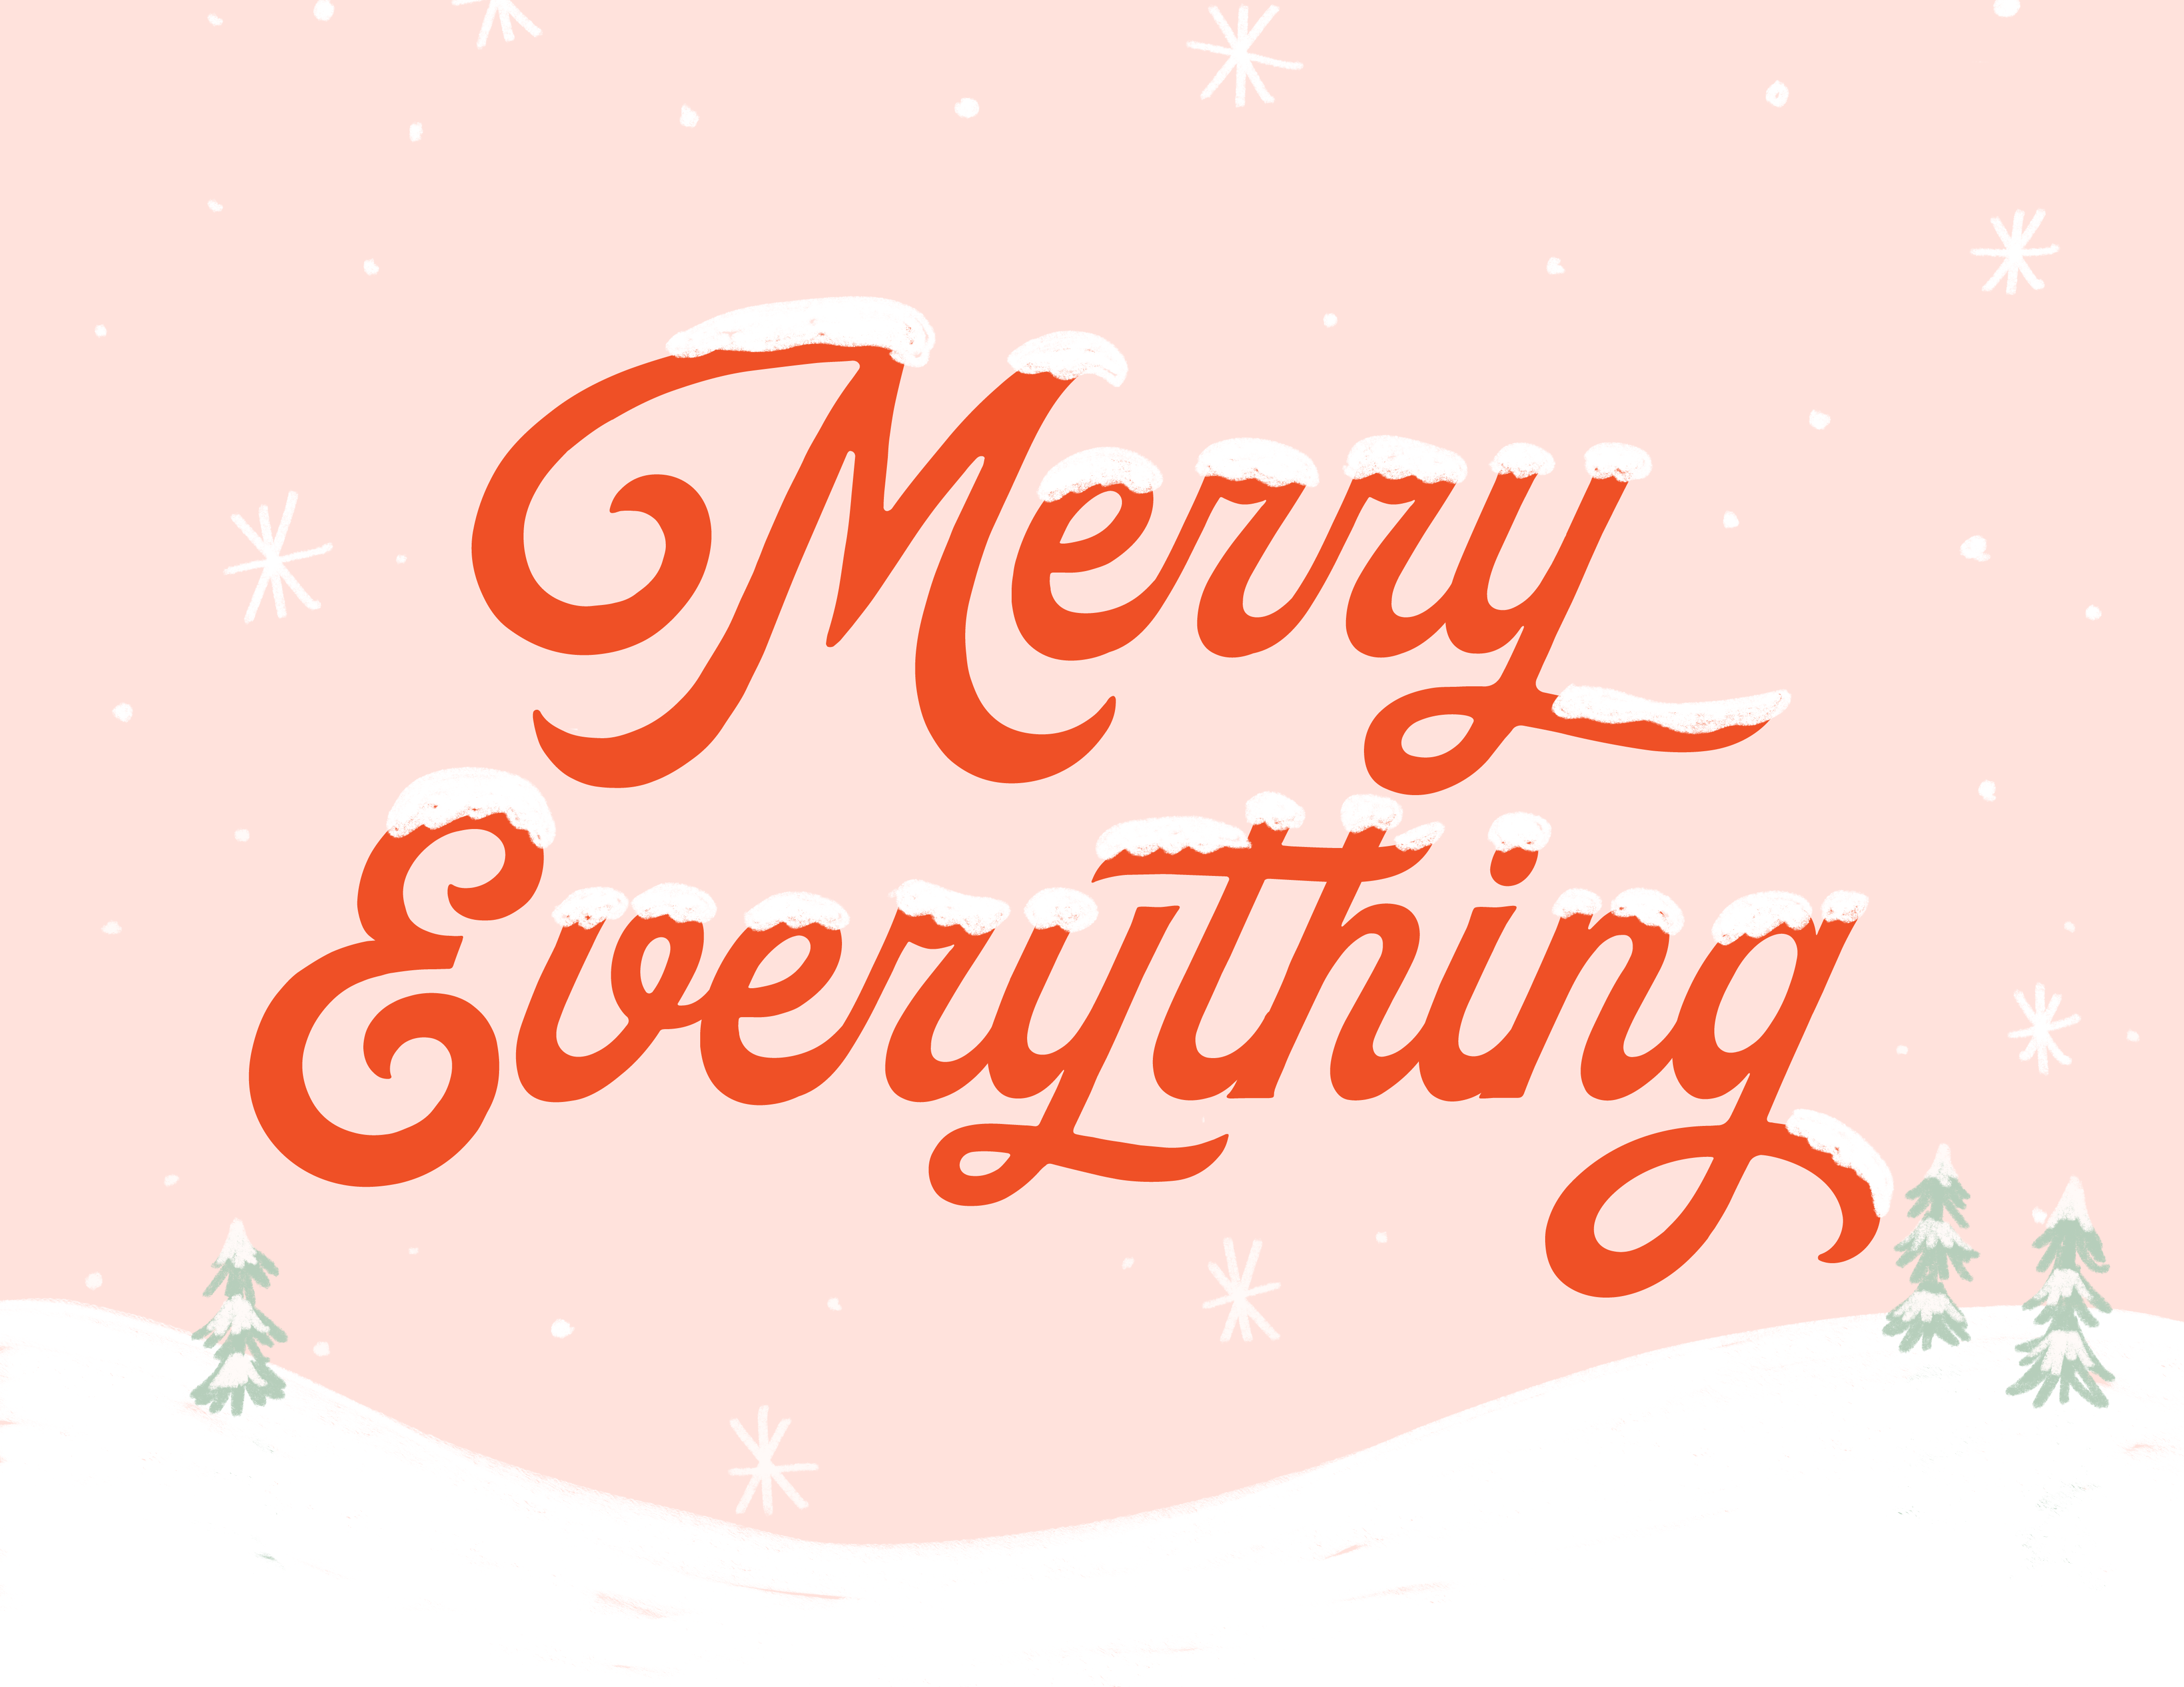 Merry Everything Holiday Card